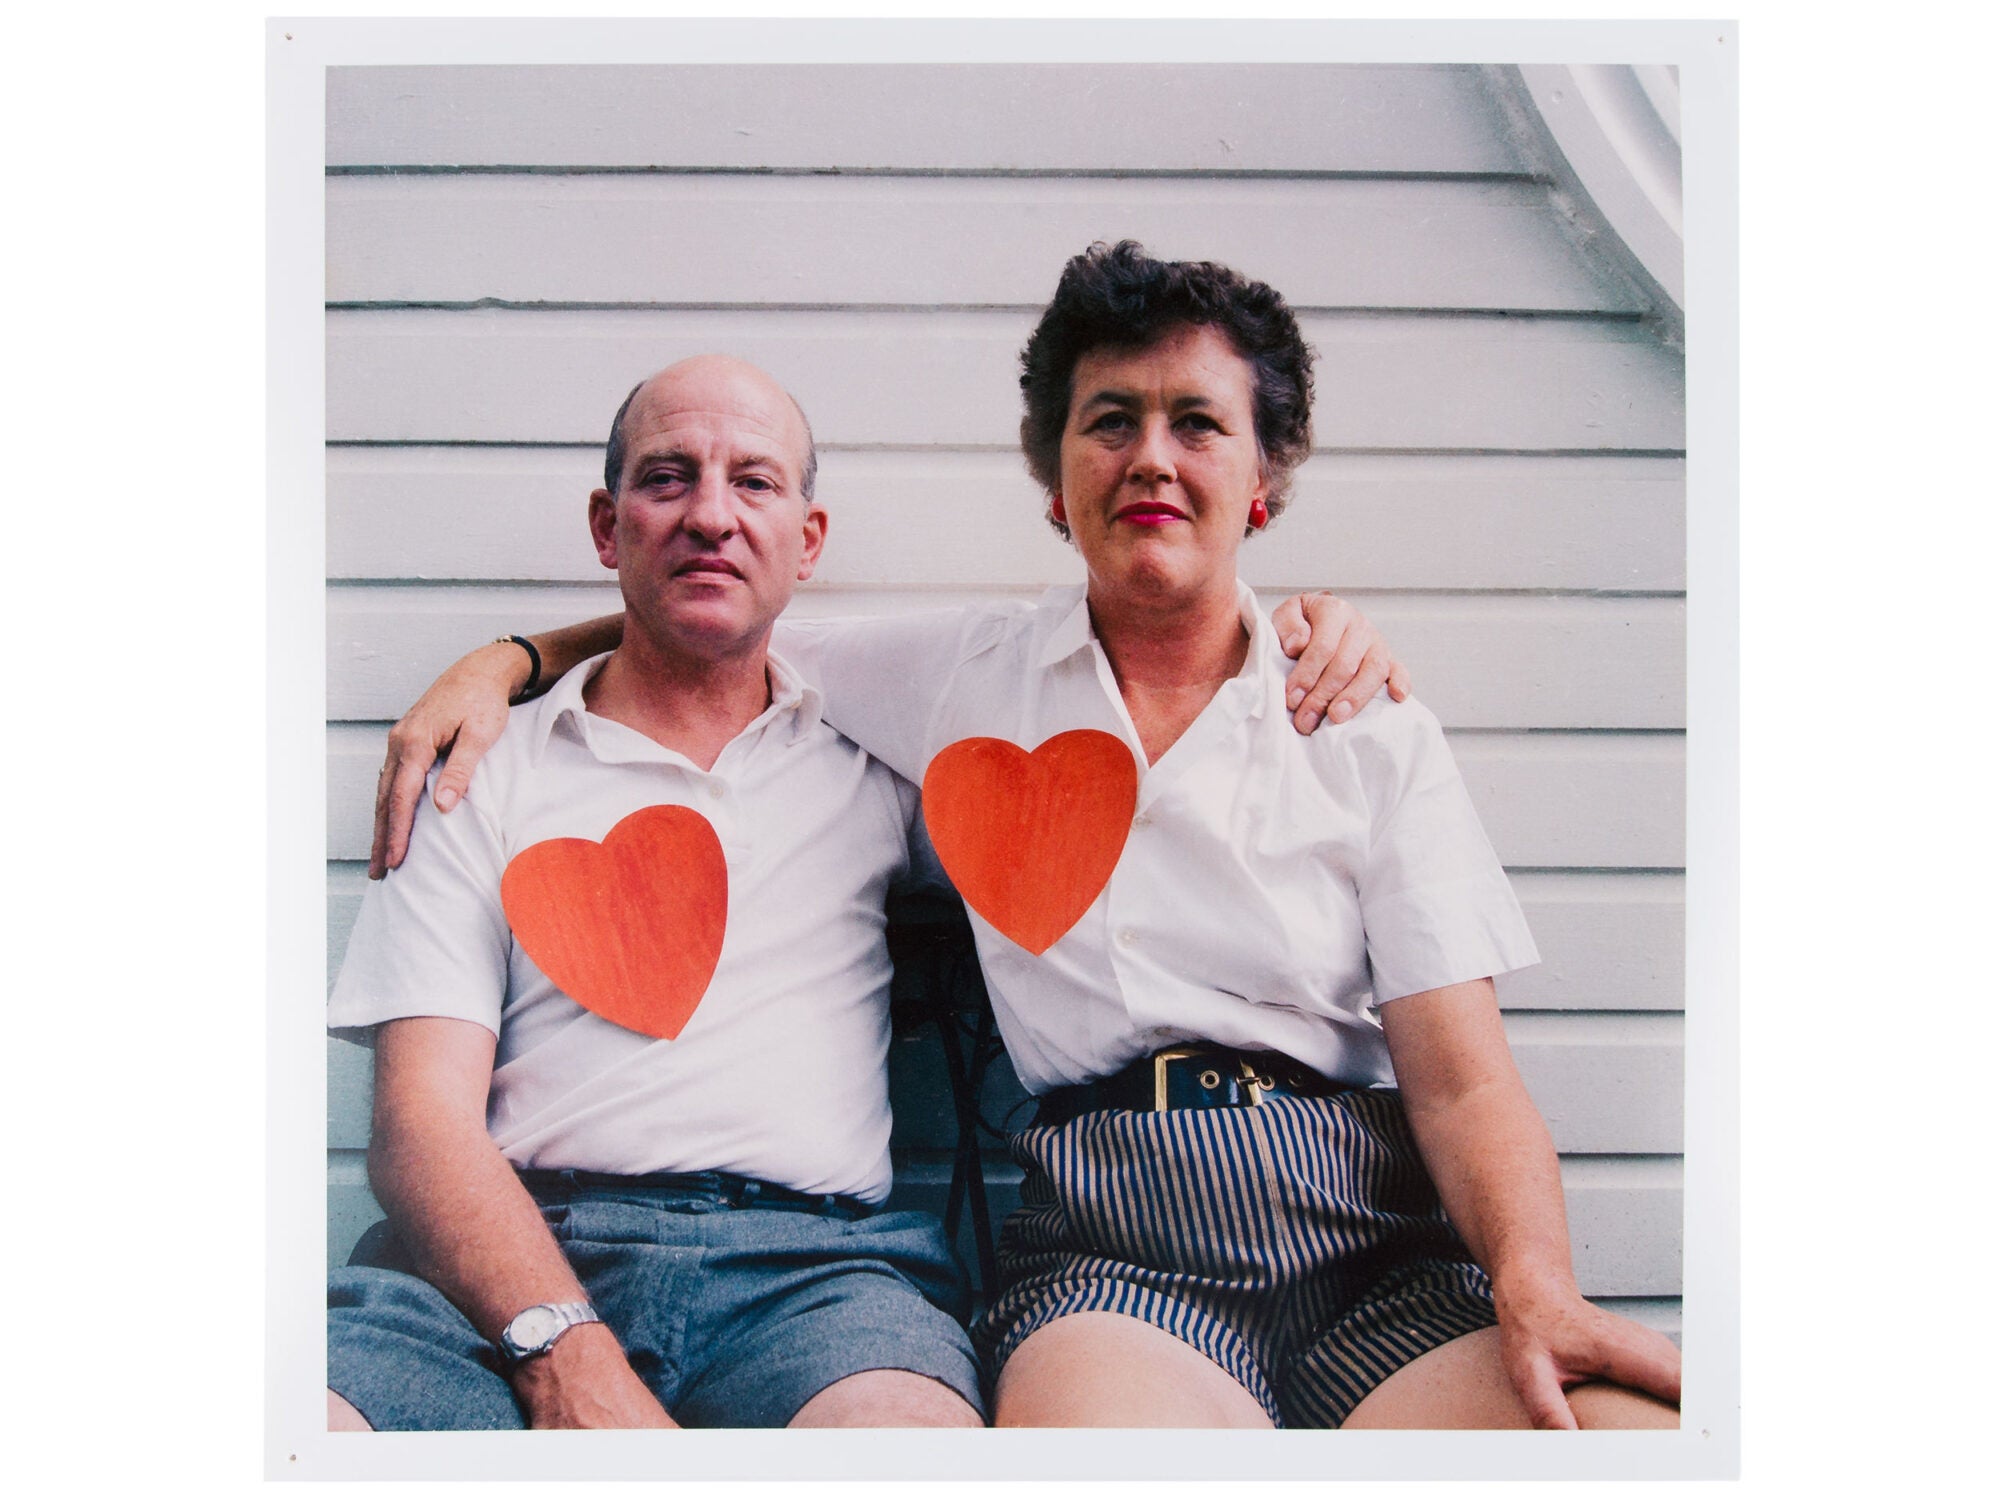 Paul and Julia Child wearing white shirts with a large paper heart on each